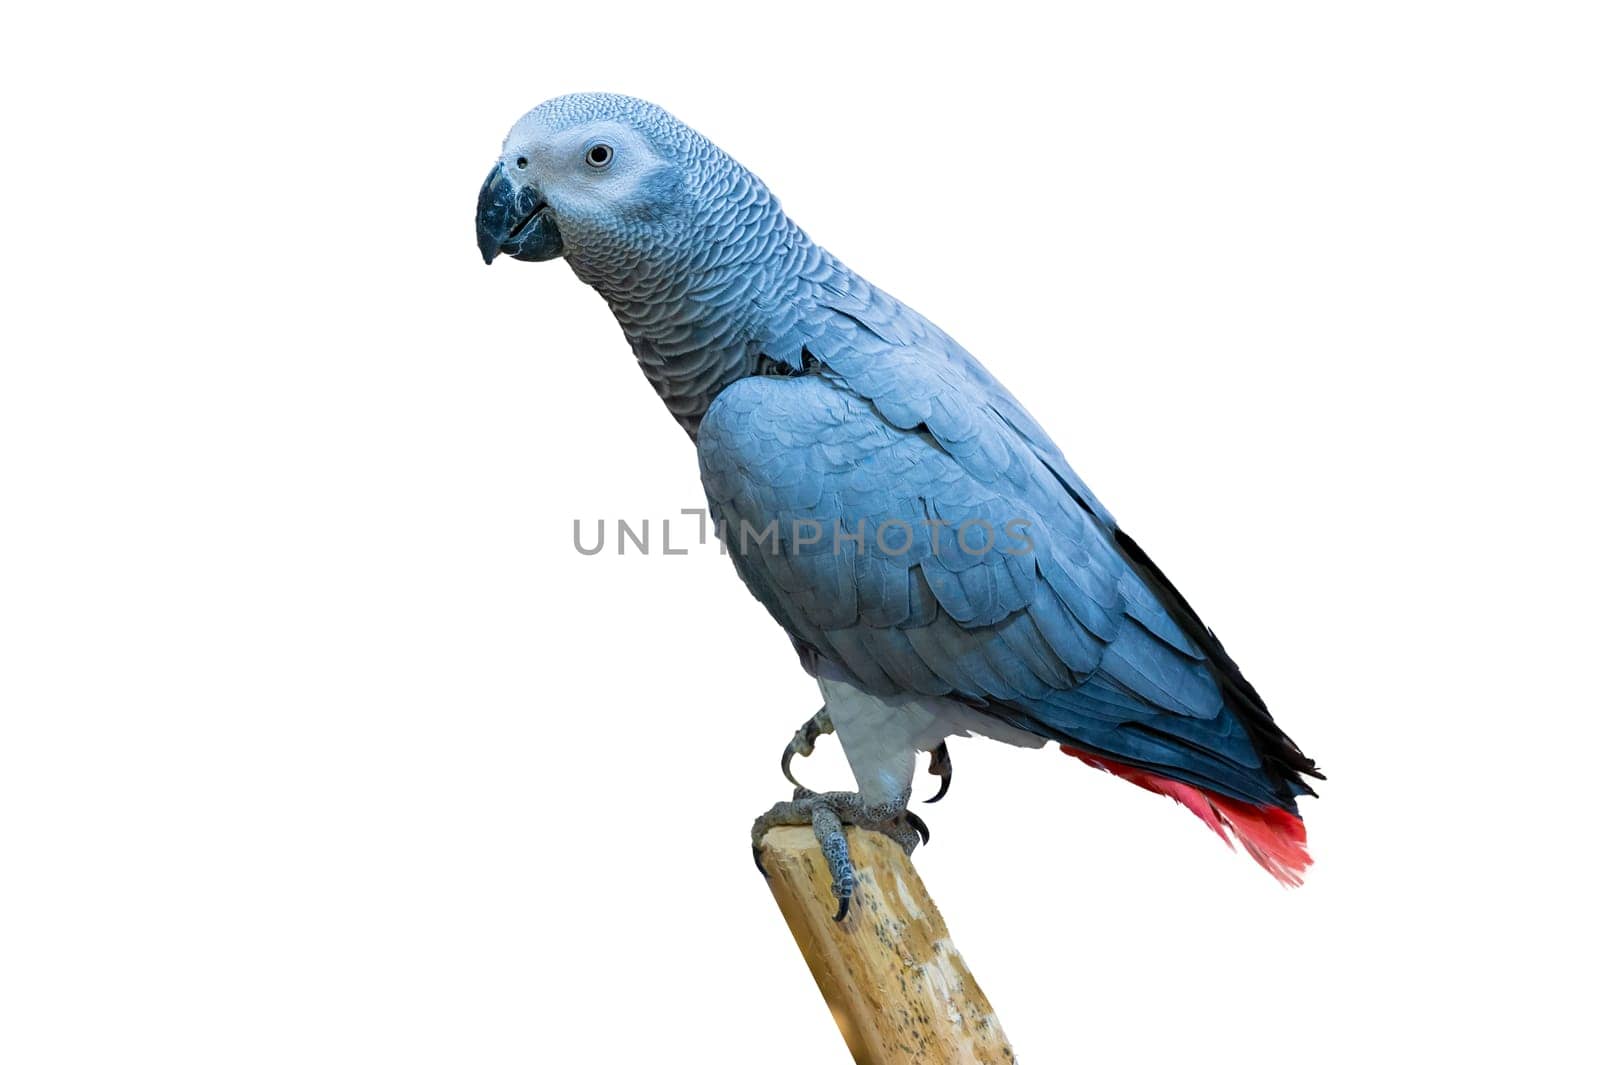 Grey parrot isolate parakeet perching on branch on white background isolate by sarayut_thaneerat